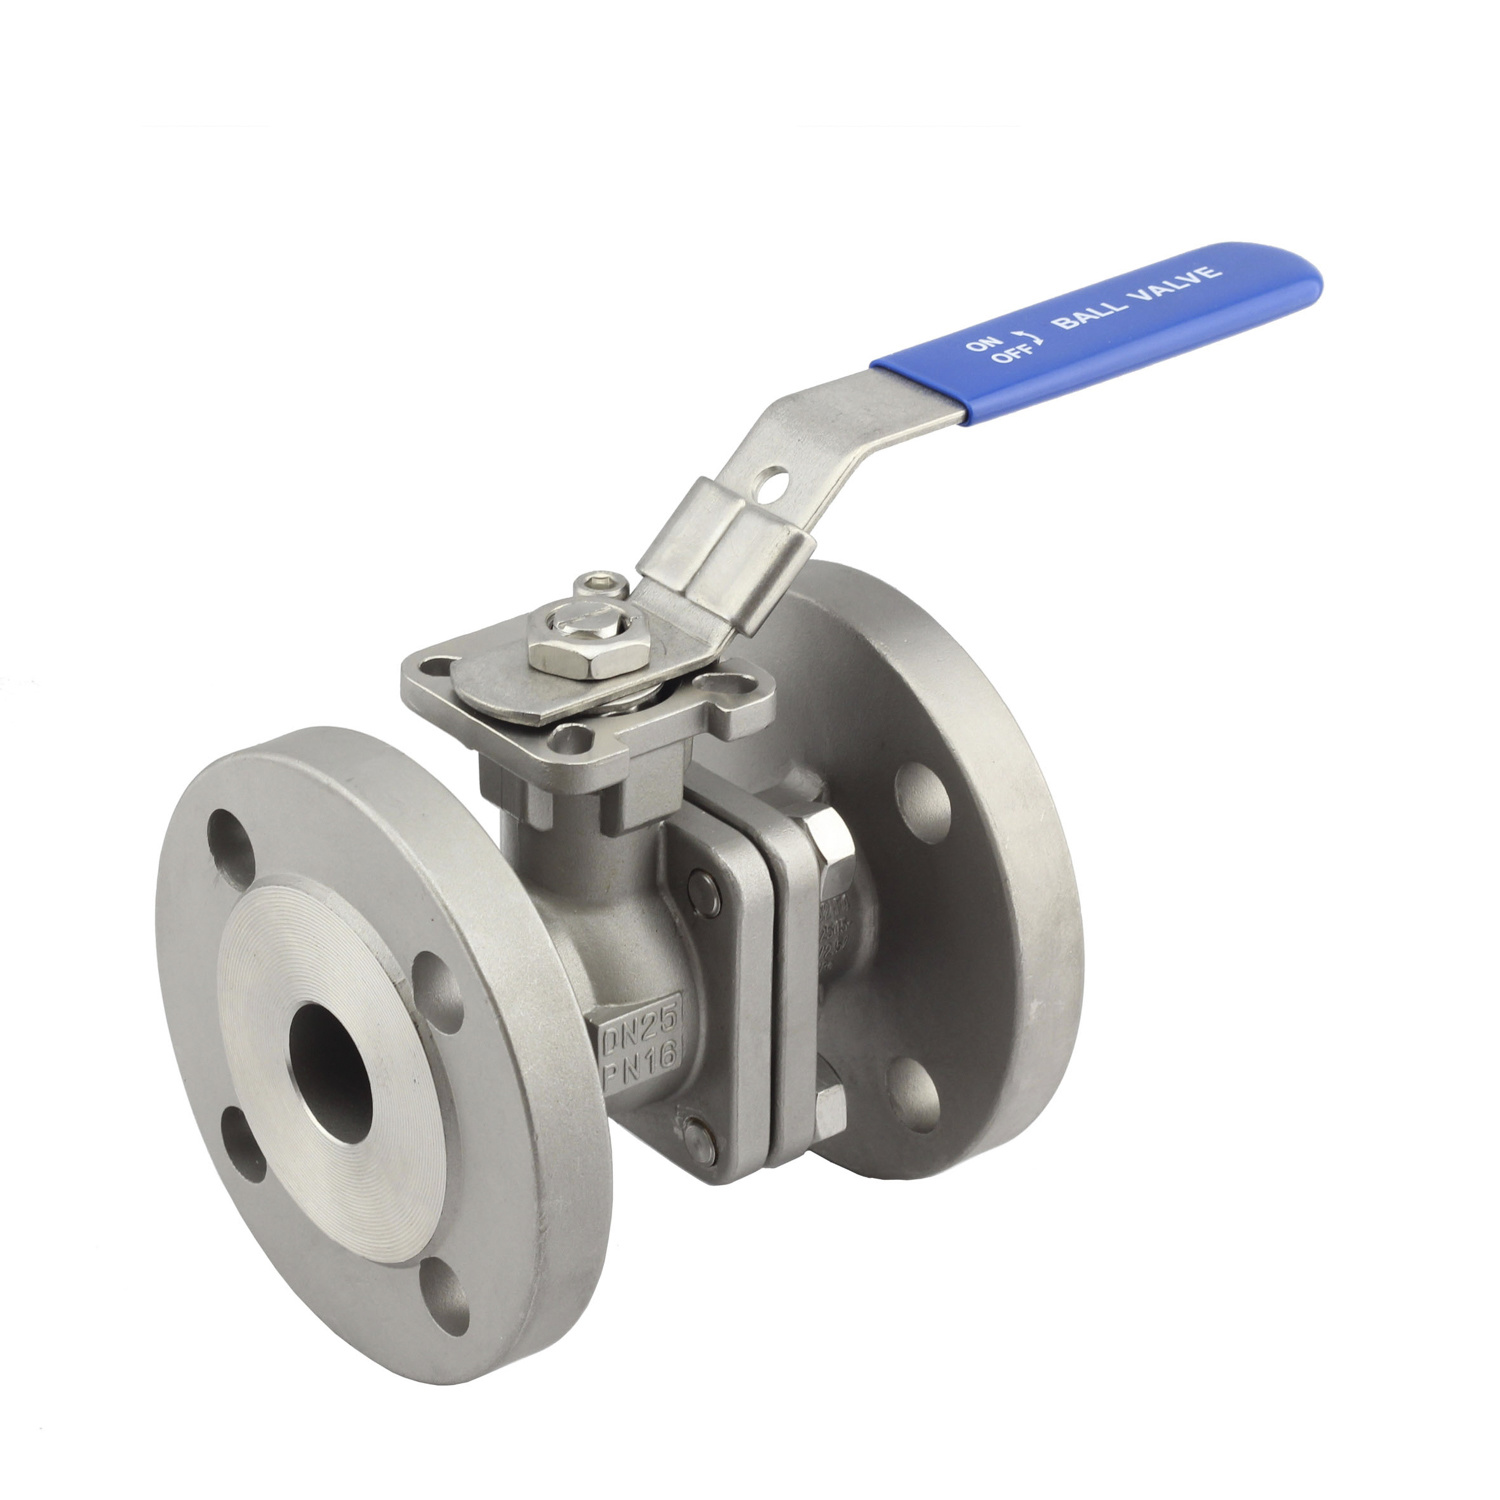 2PC Flanged Ball Valve Full Bore with Mounting Pad